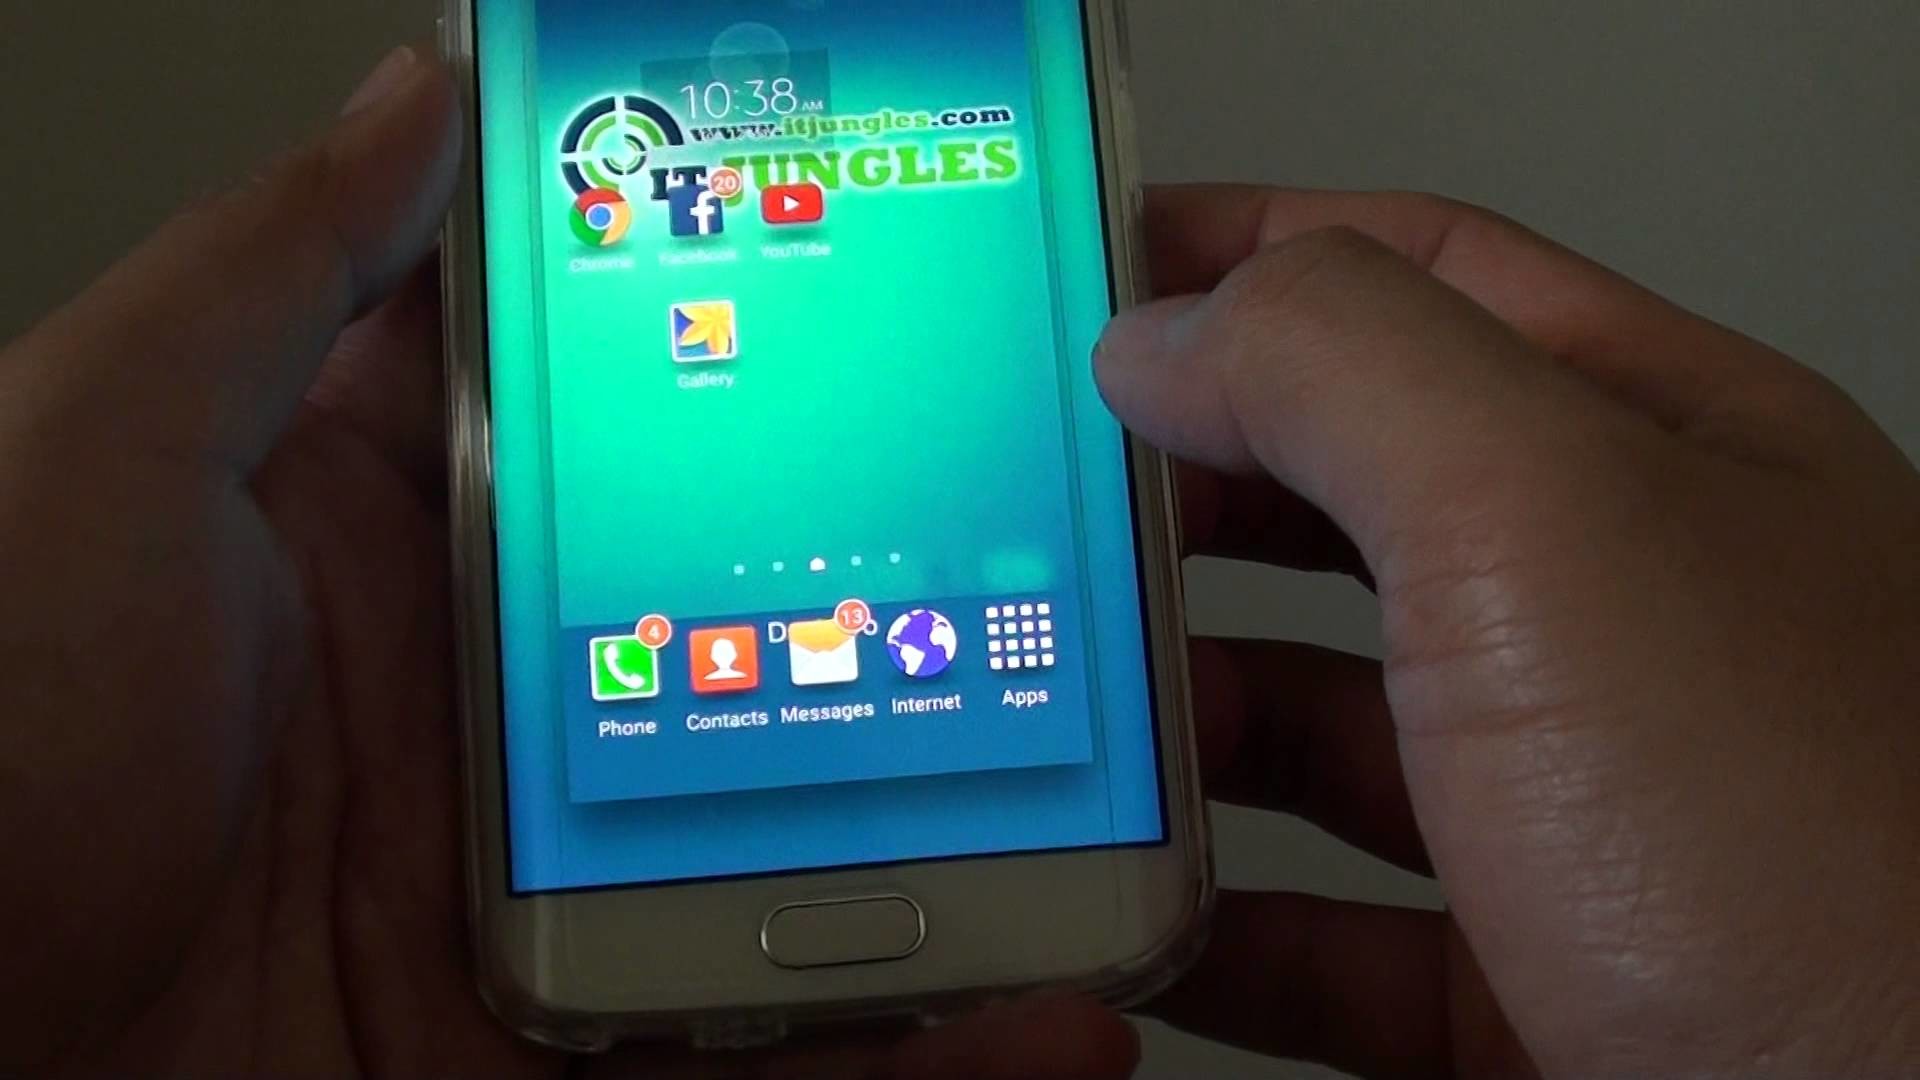 1920x1080 Samsung Galaxy S6 Edge: How to Change Home Screen Wallpaper Picture -  YouTube